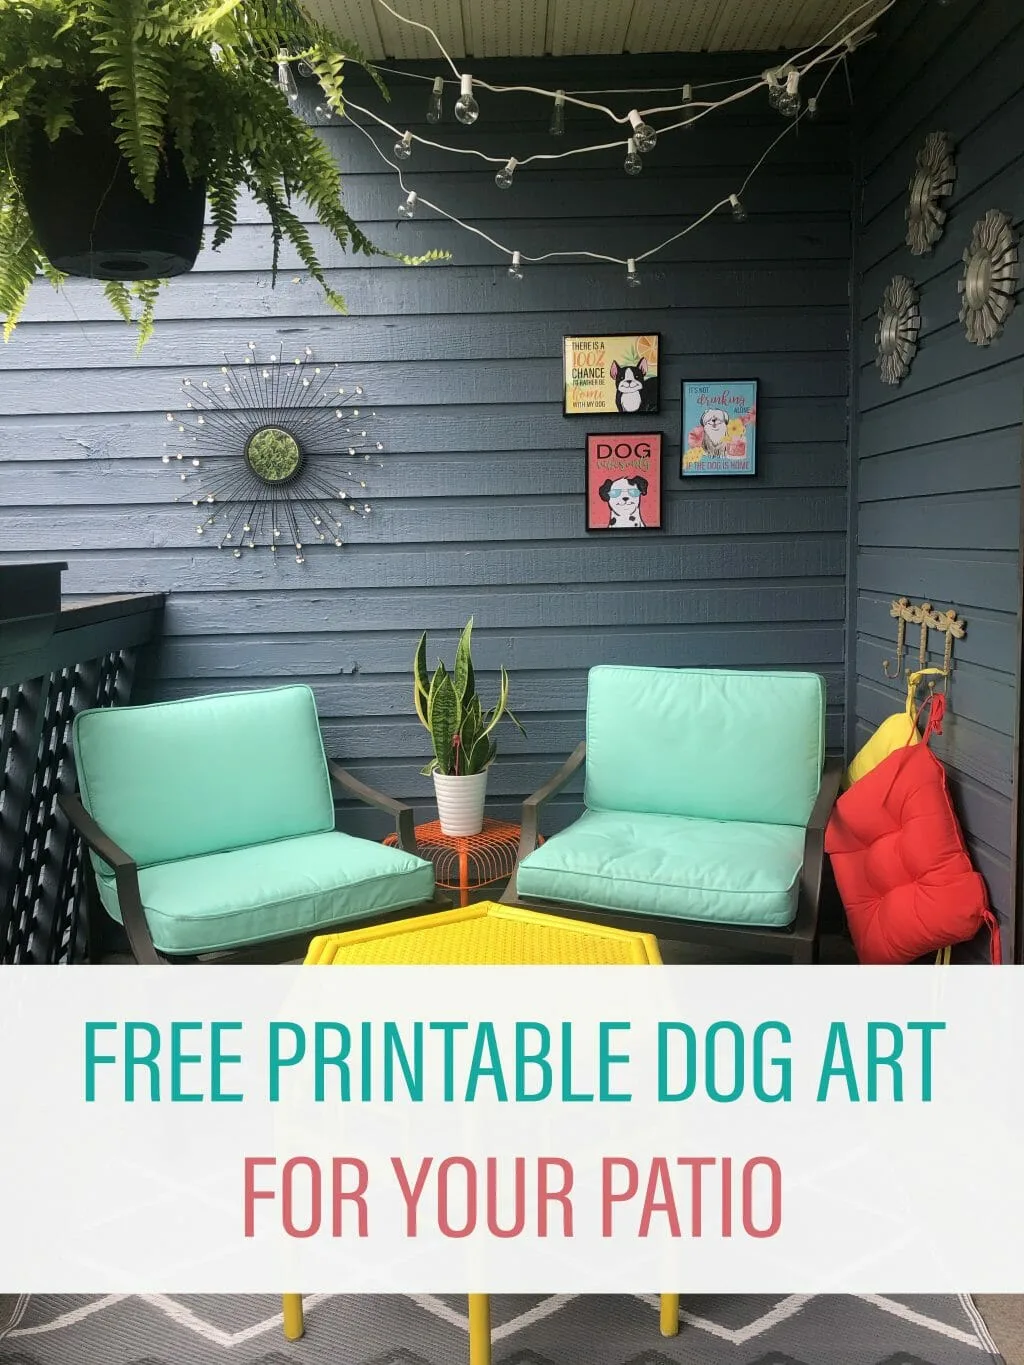 a brightly coloured patio with comfy teal chairs, a bright yellow octagon art deco table and printable dog art in black frames on the wall